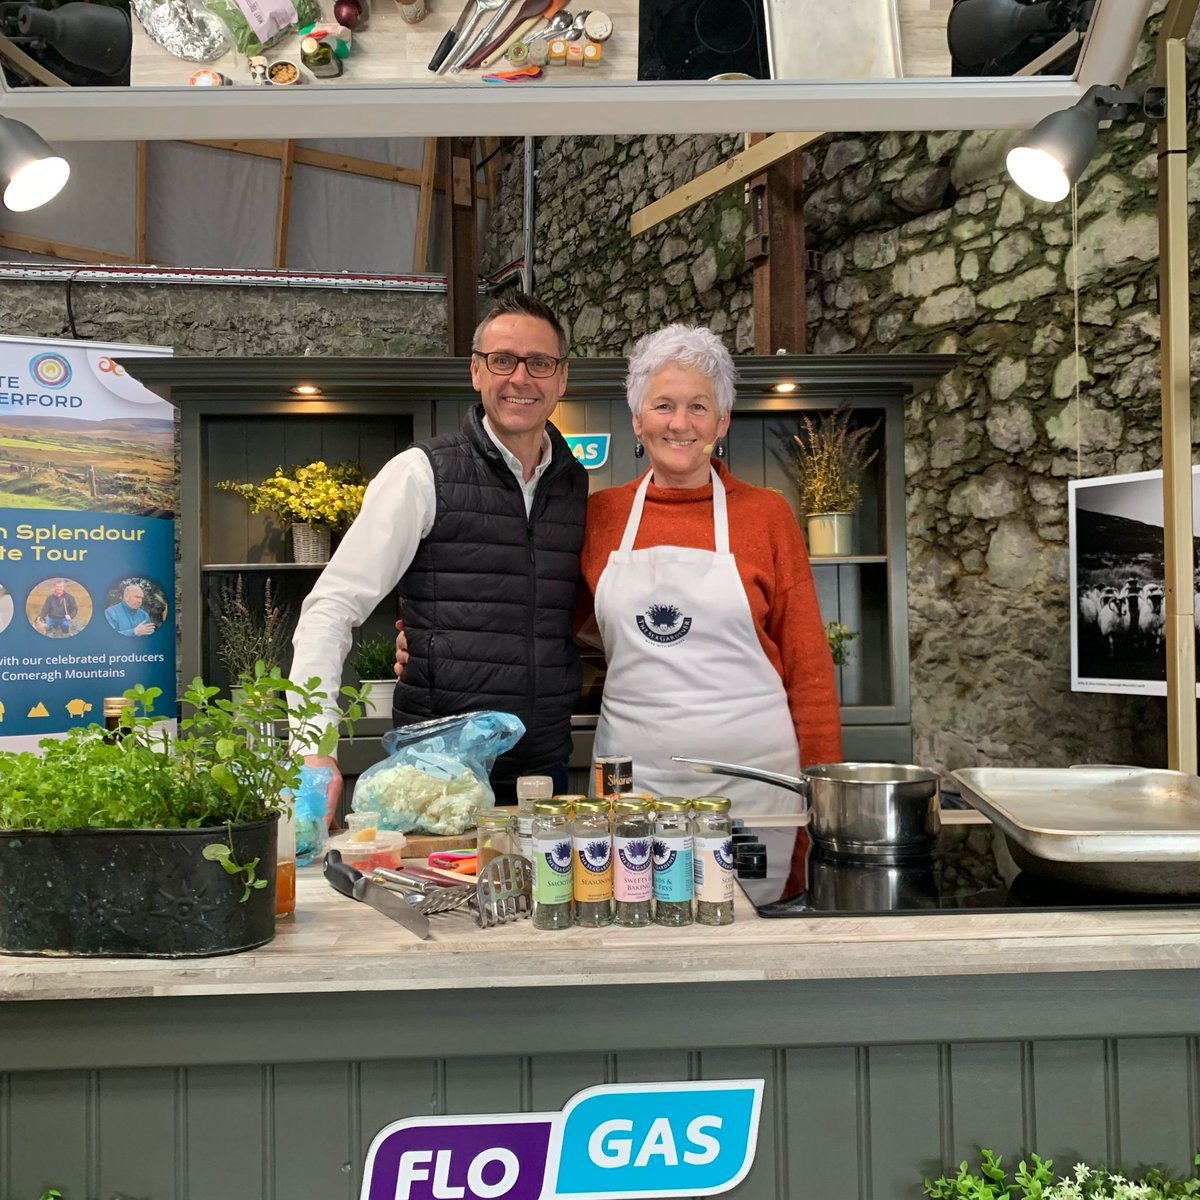 It was a great pleasure to present the Taste Waterford Demo Stage at this year's Waterford Festival of Food. To work with passionate and knowledgeable people is inspiring - and to try their produce was a bonus! Thanks to the @WdFoodFestival #Waterford